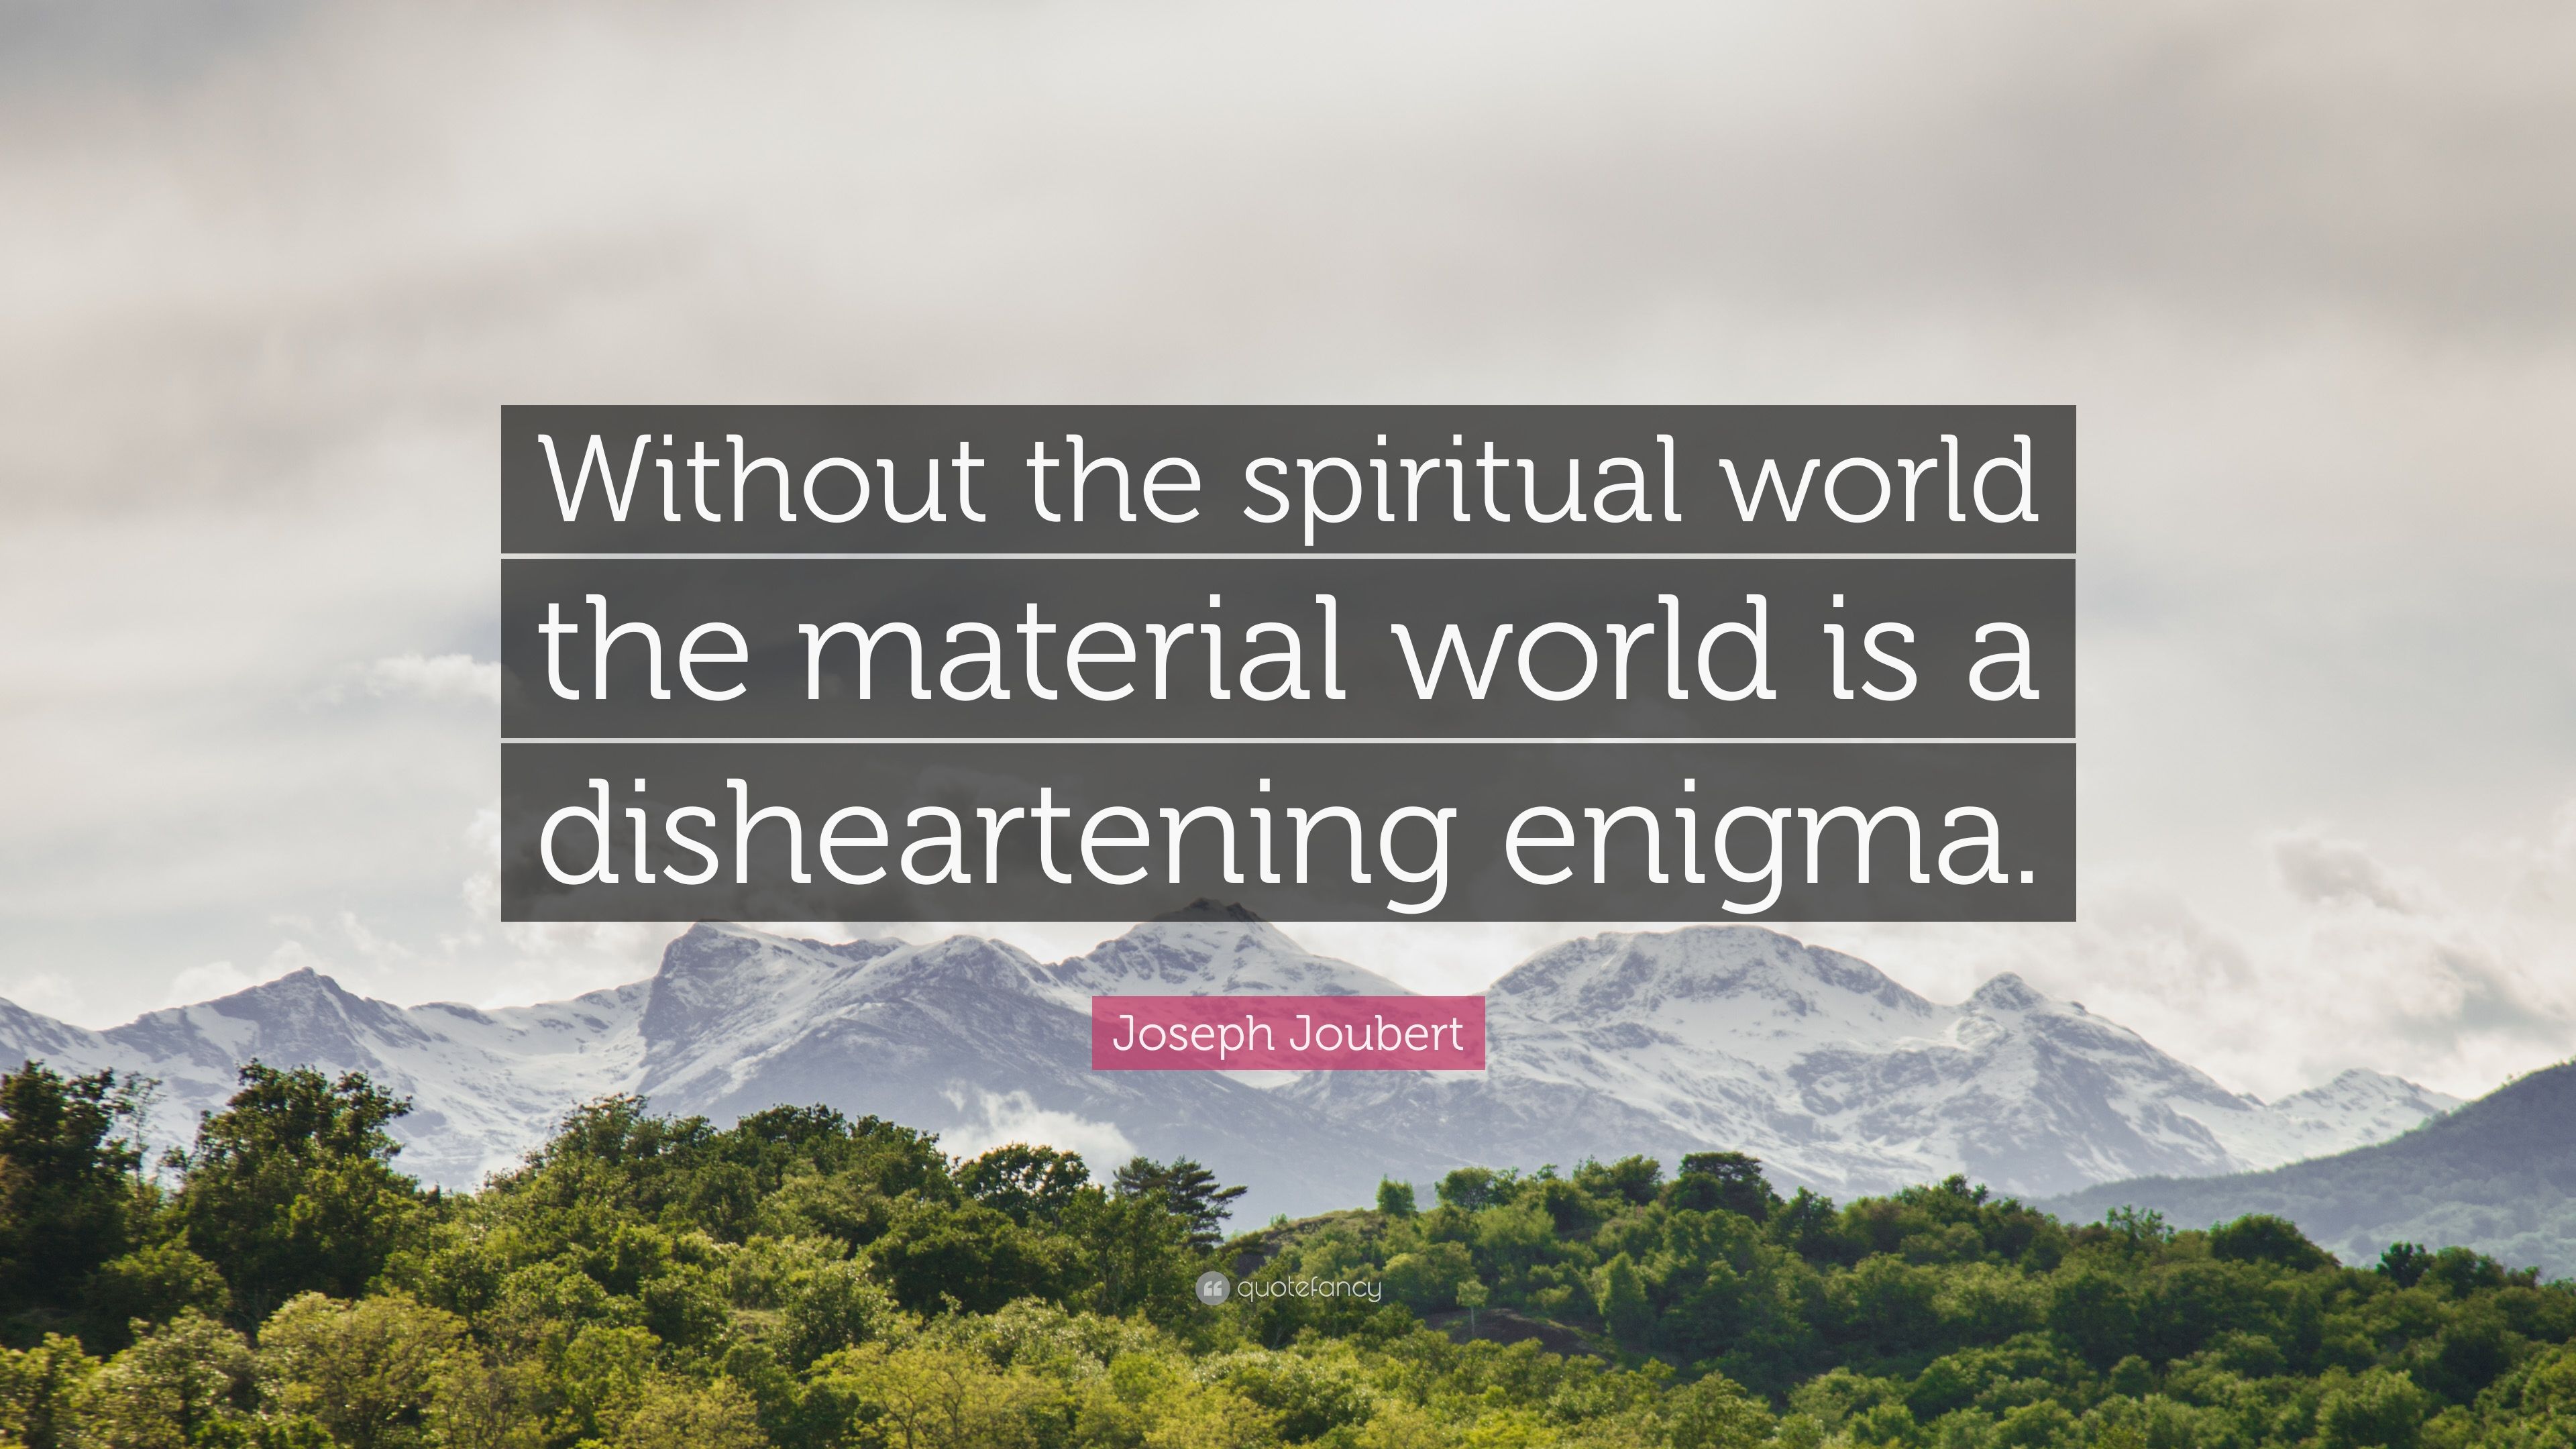 Joseph Joubert Quote: “Without the spiritual world the material